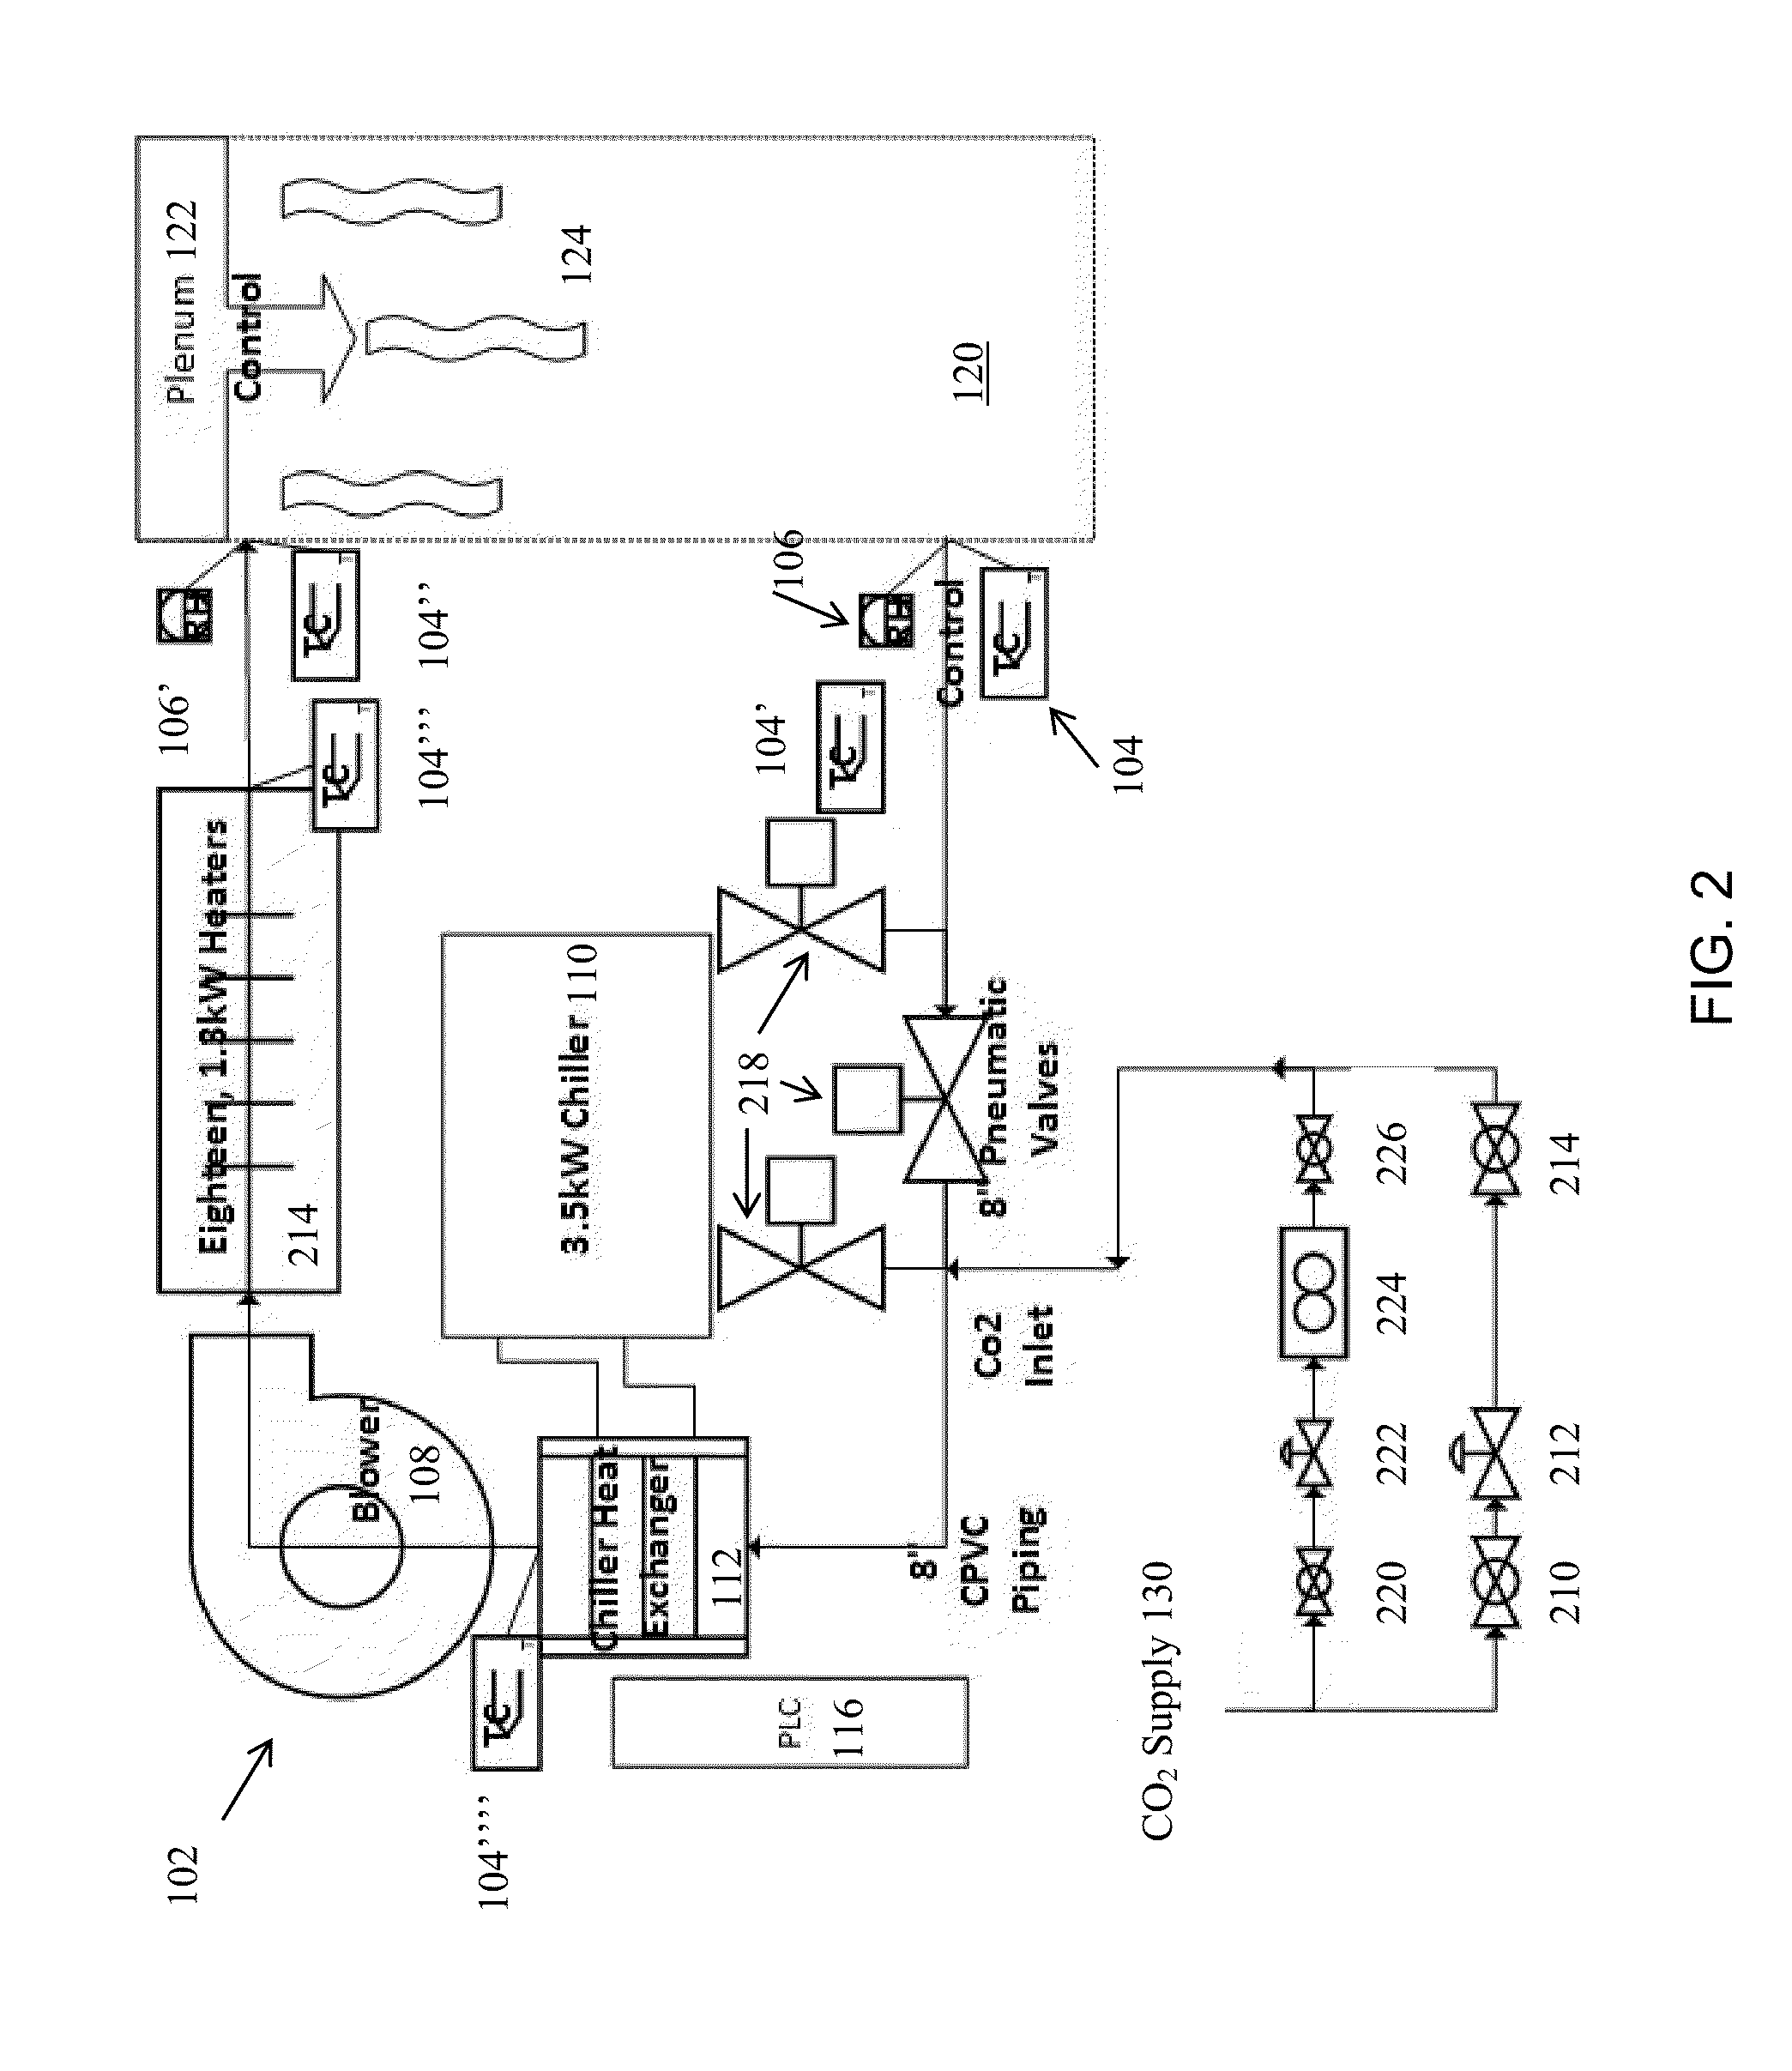 Method and apparatus for the curing of composite material by control over rate limiting steps in water removal